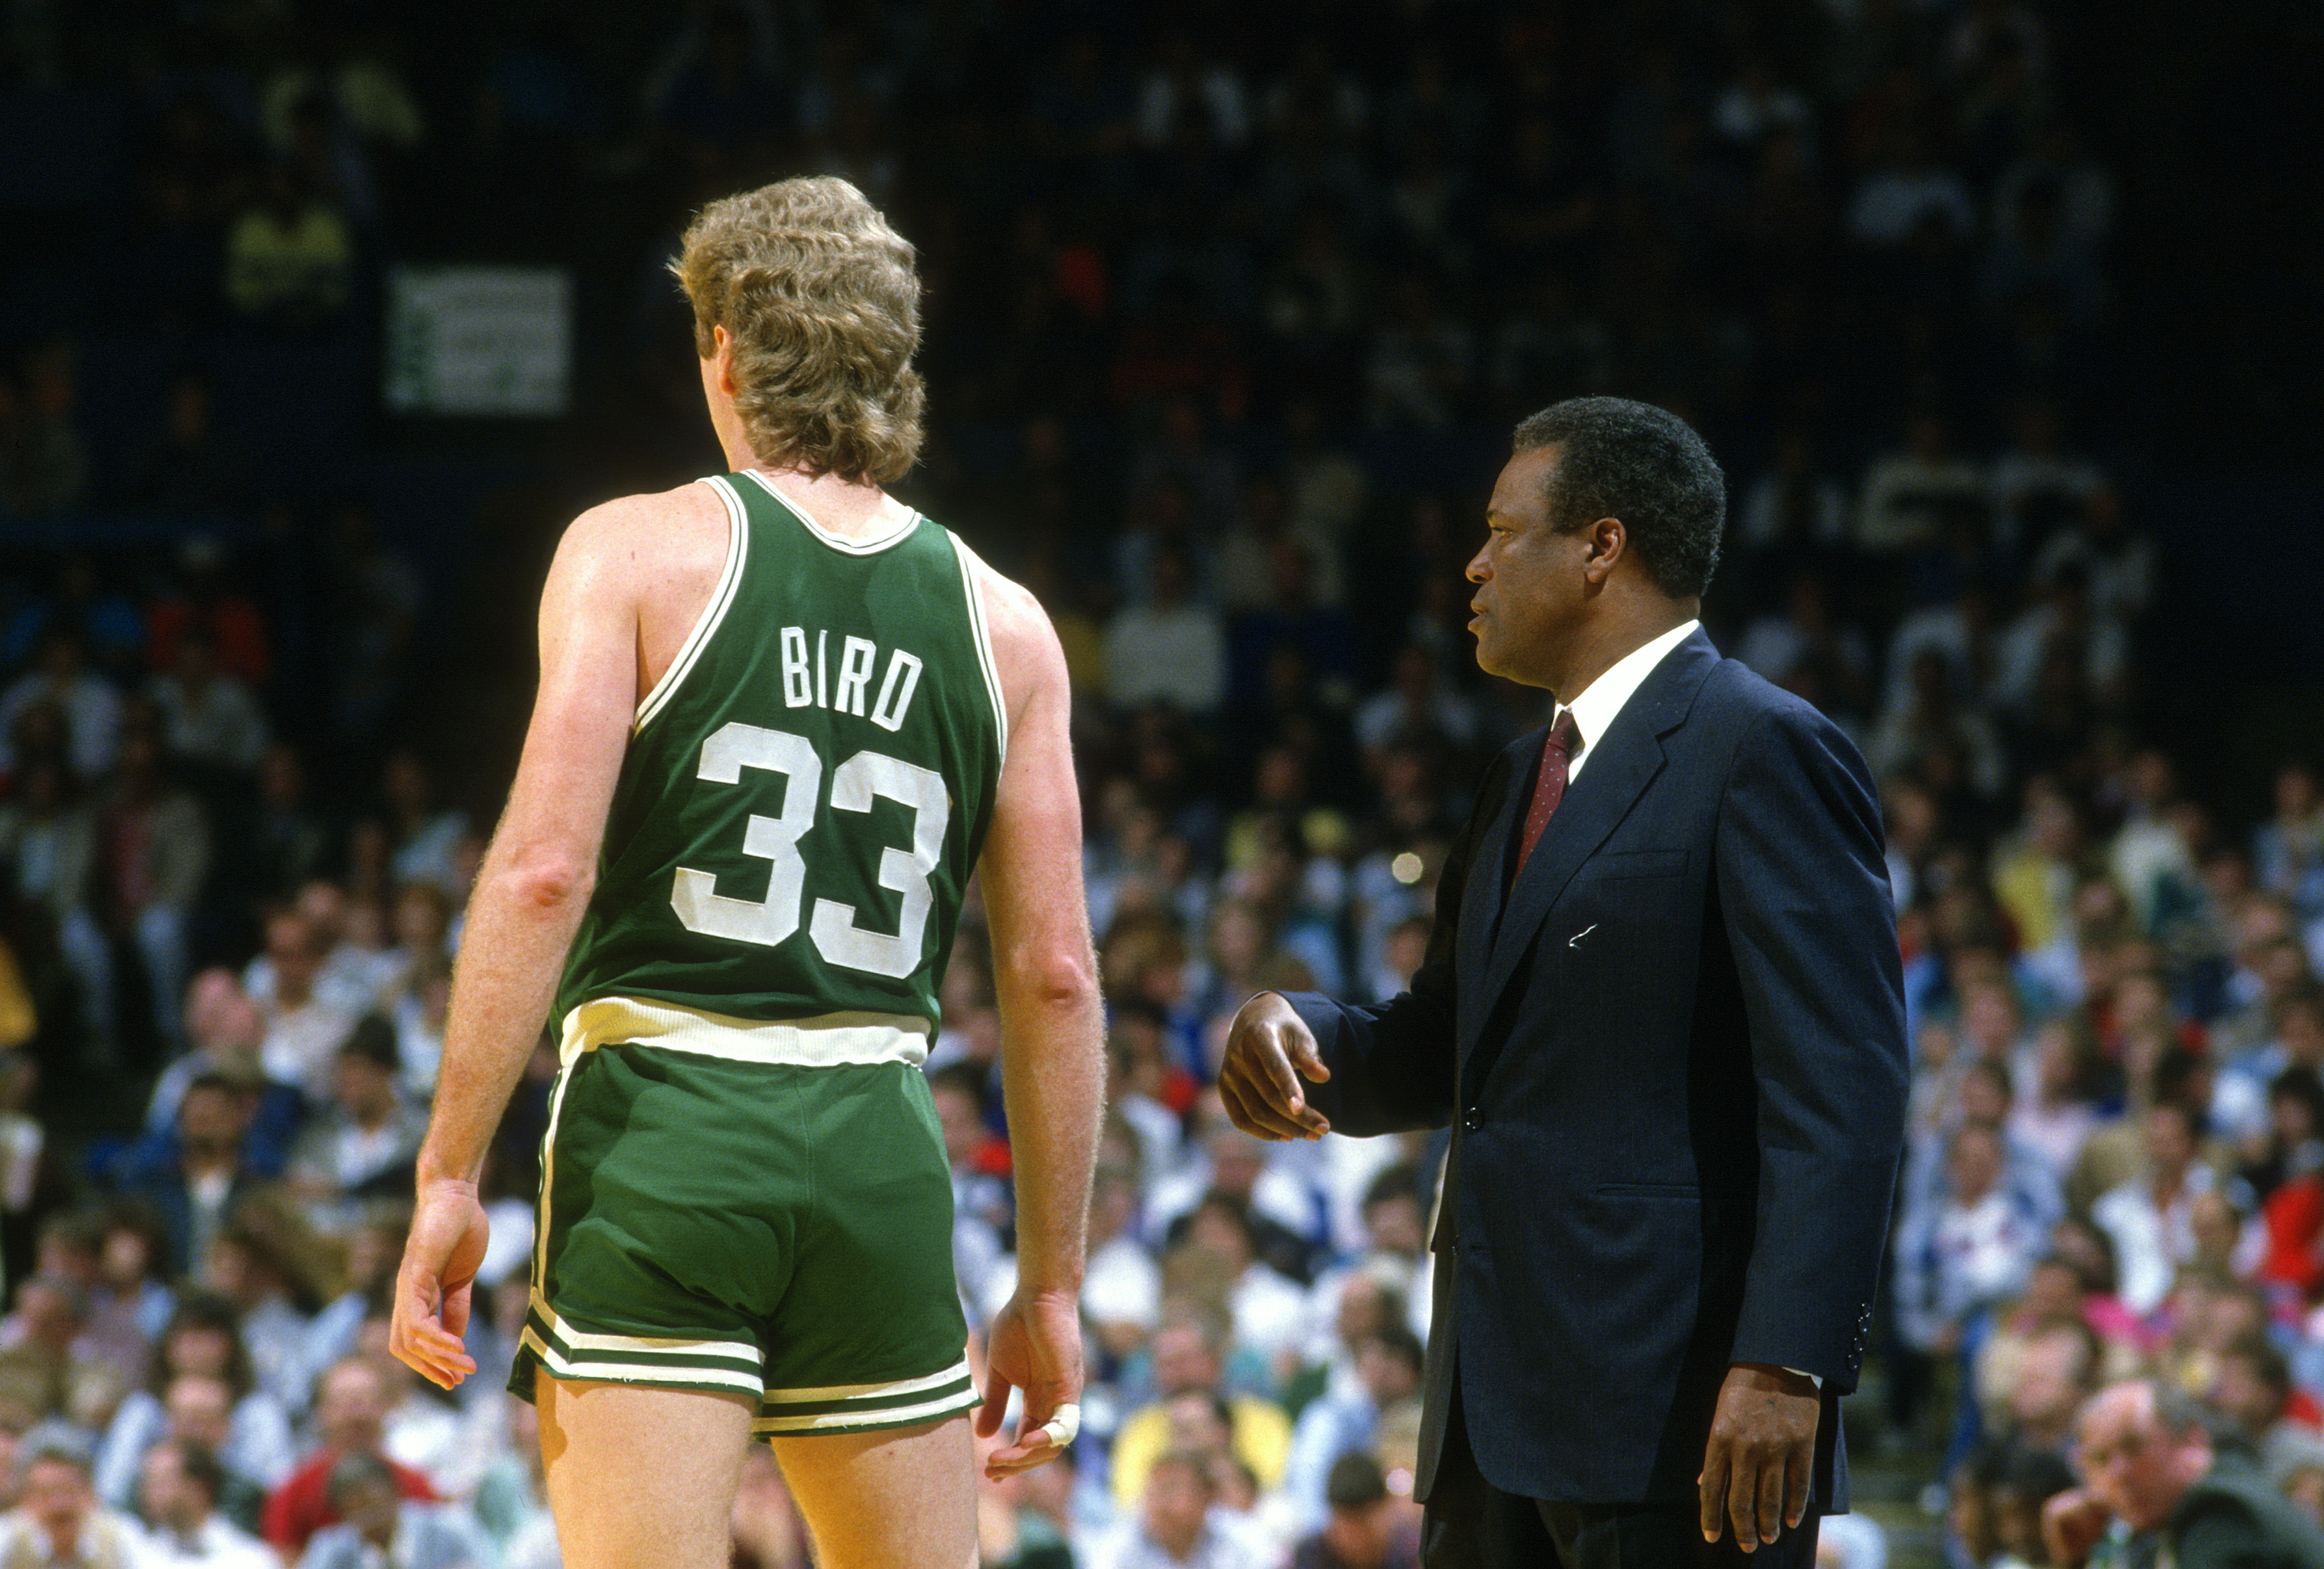 Larry Bird received a death threat mid-game during the 1985 NBA Finals